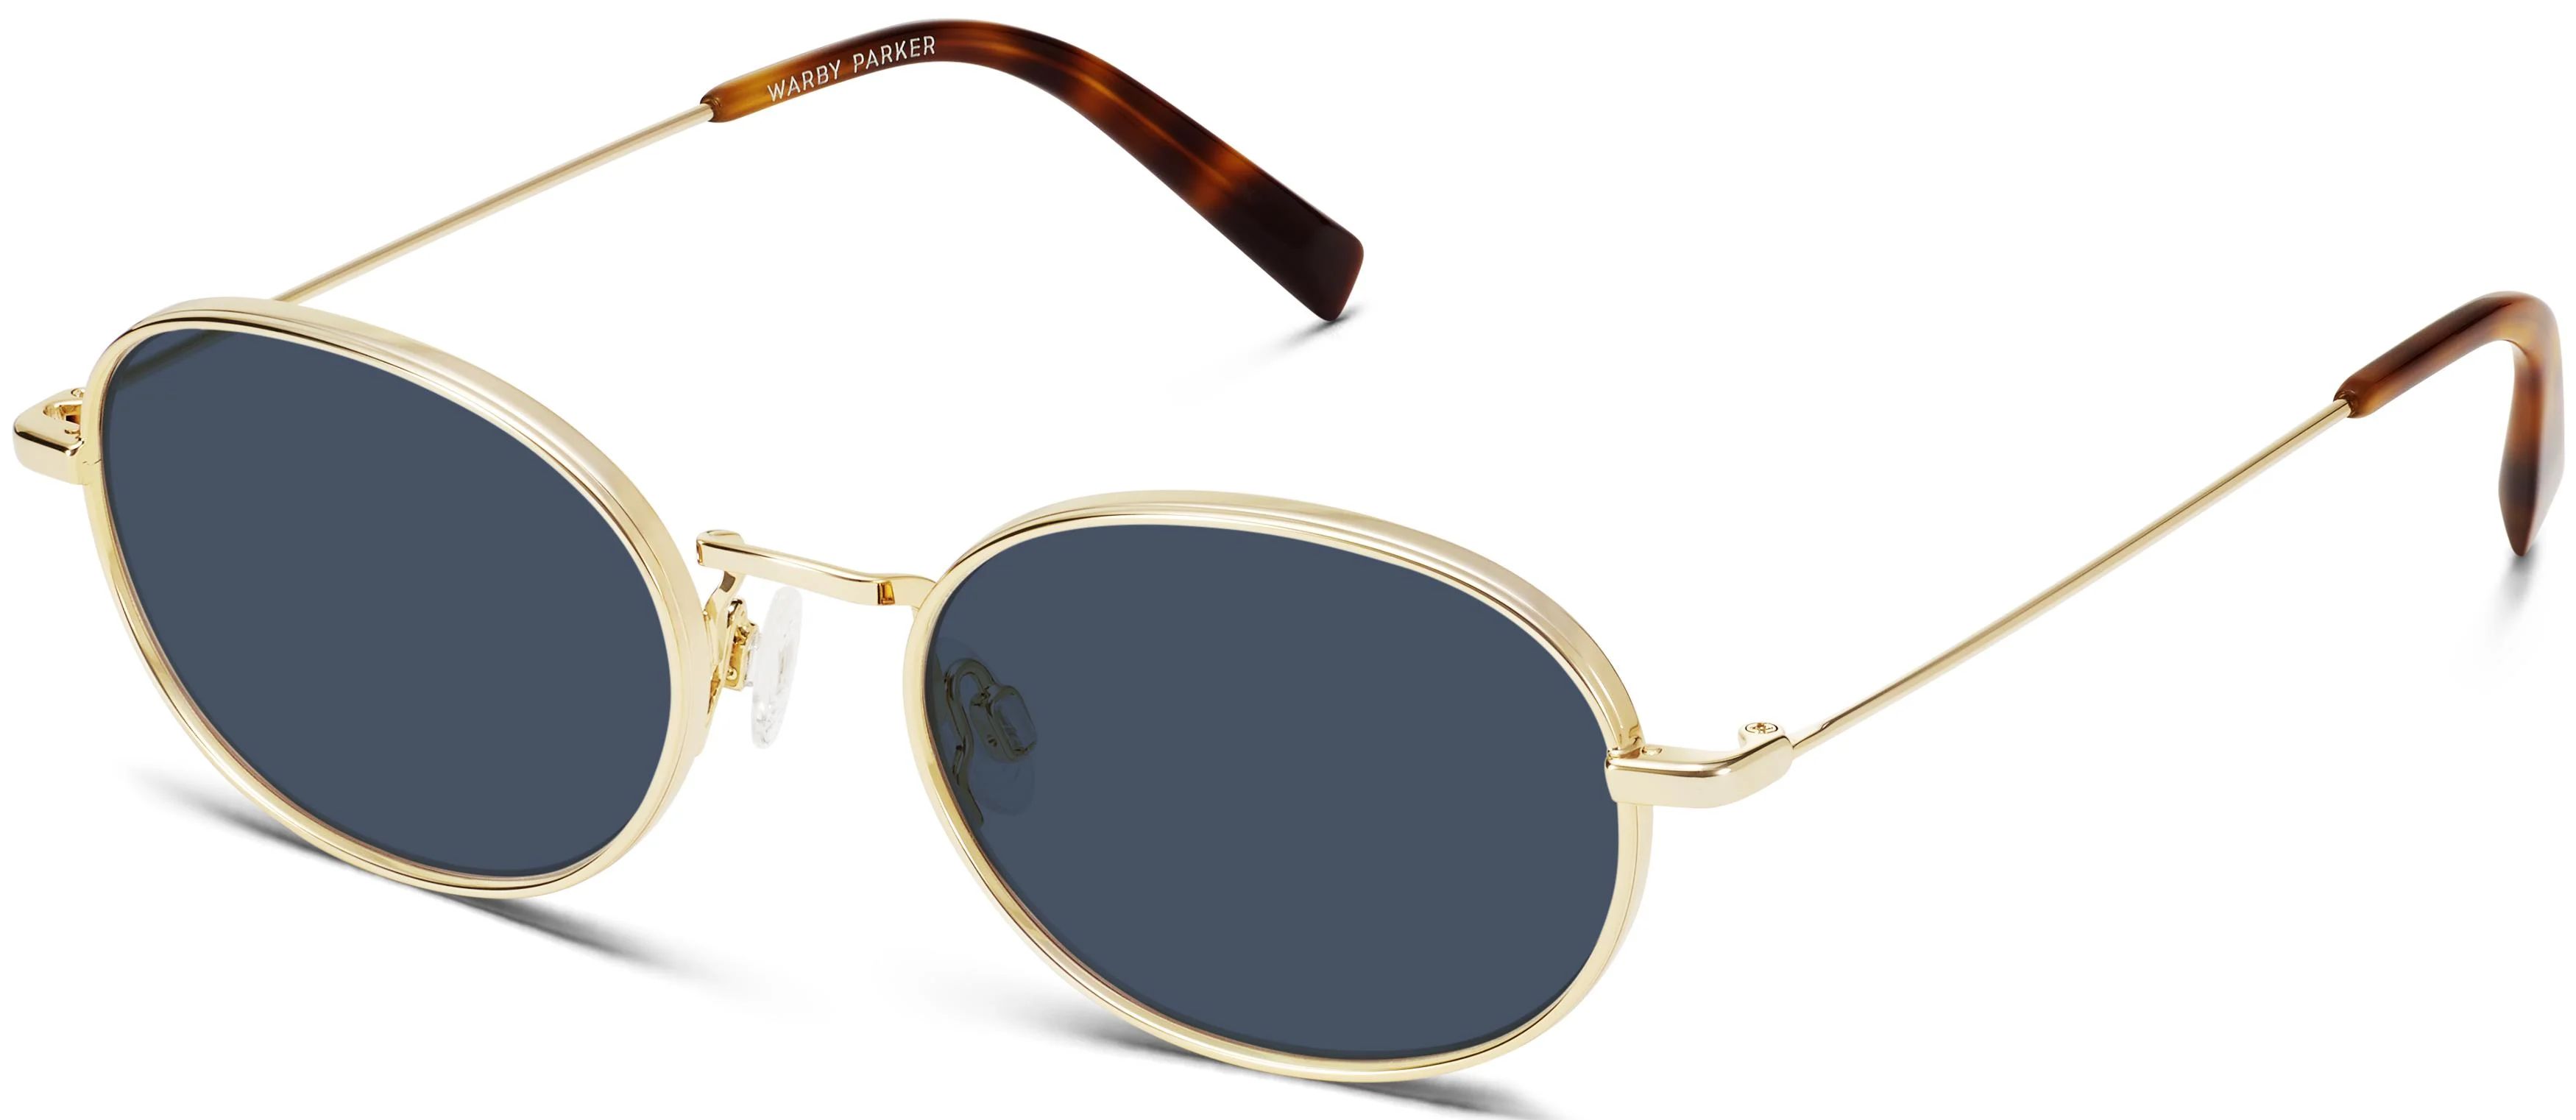 Albie Sunglasses in Polished Gold | Warby Parker | Warby Parker (US)